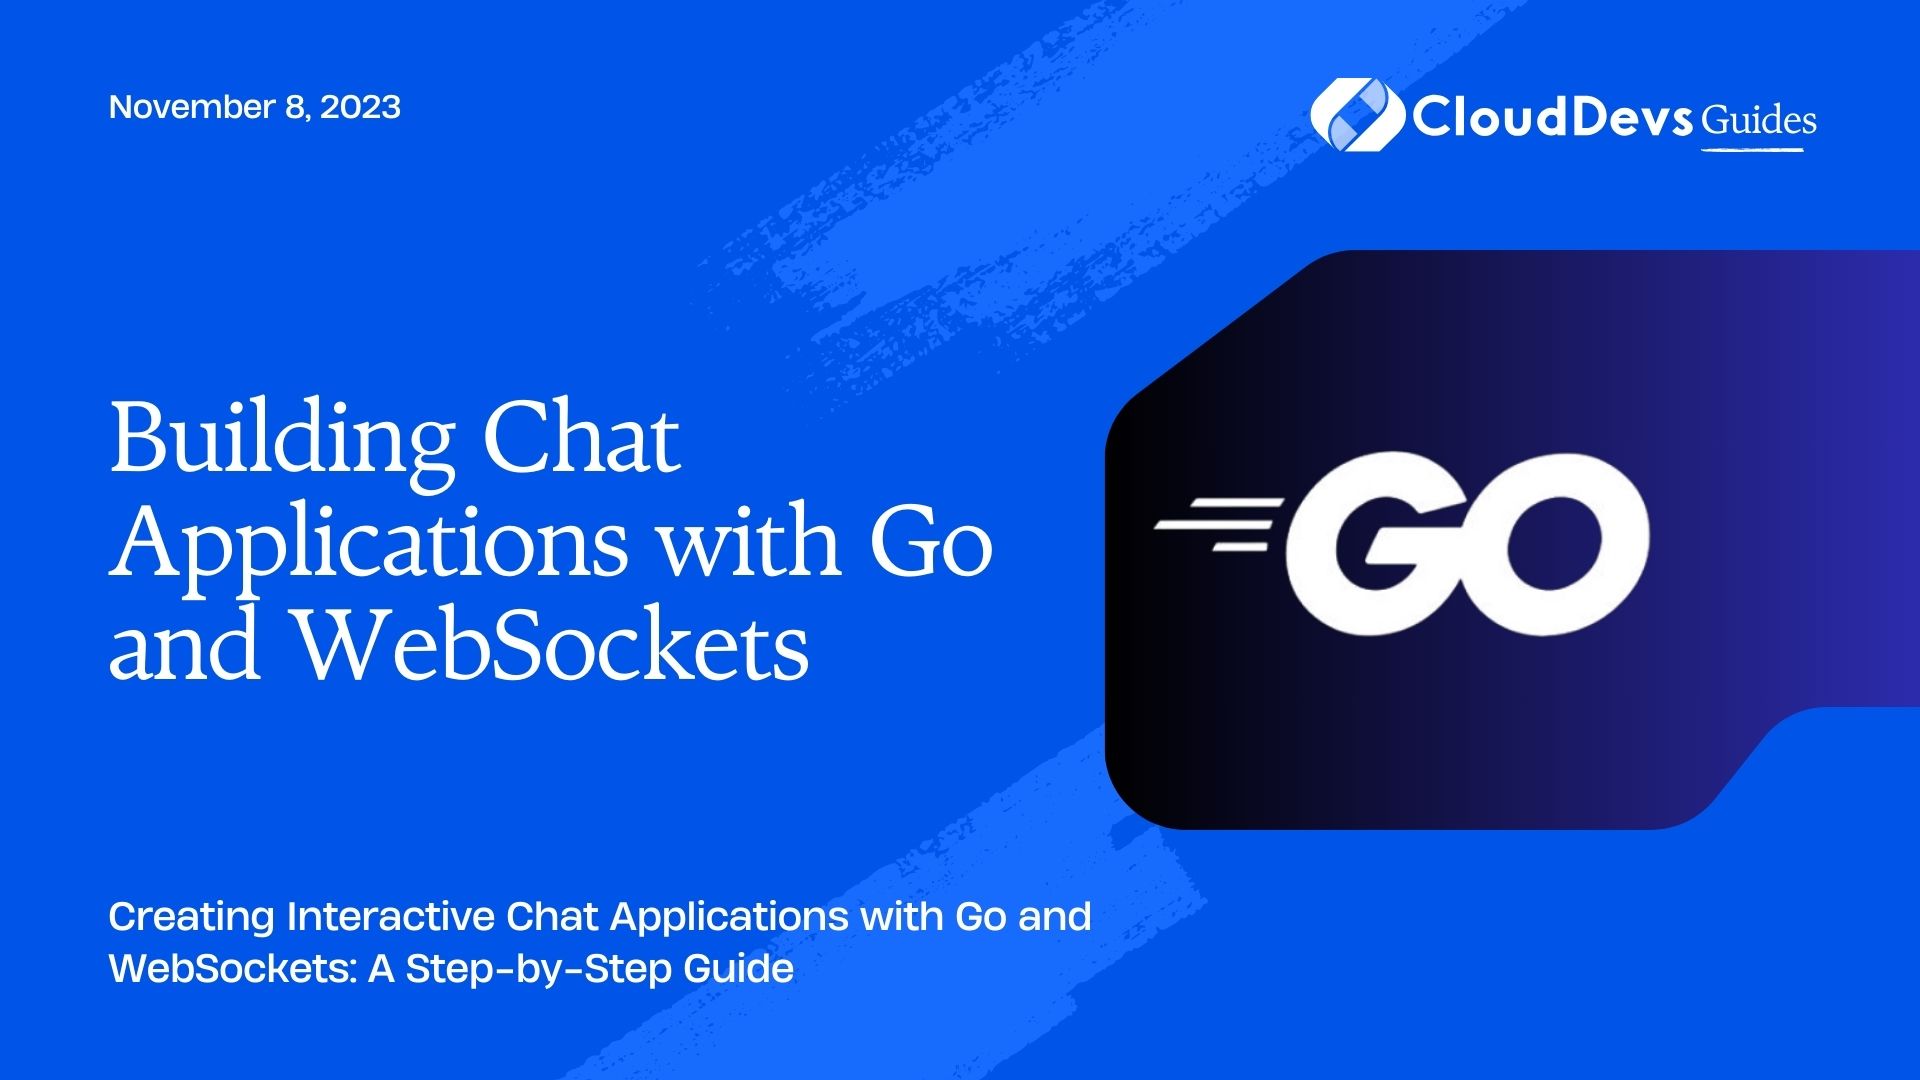 Building Chat Applications with Go and WebSockets